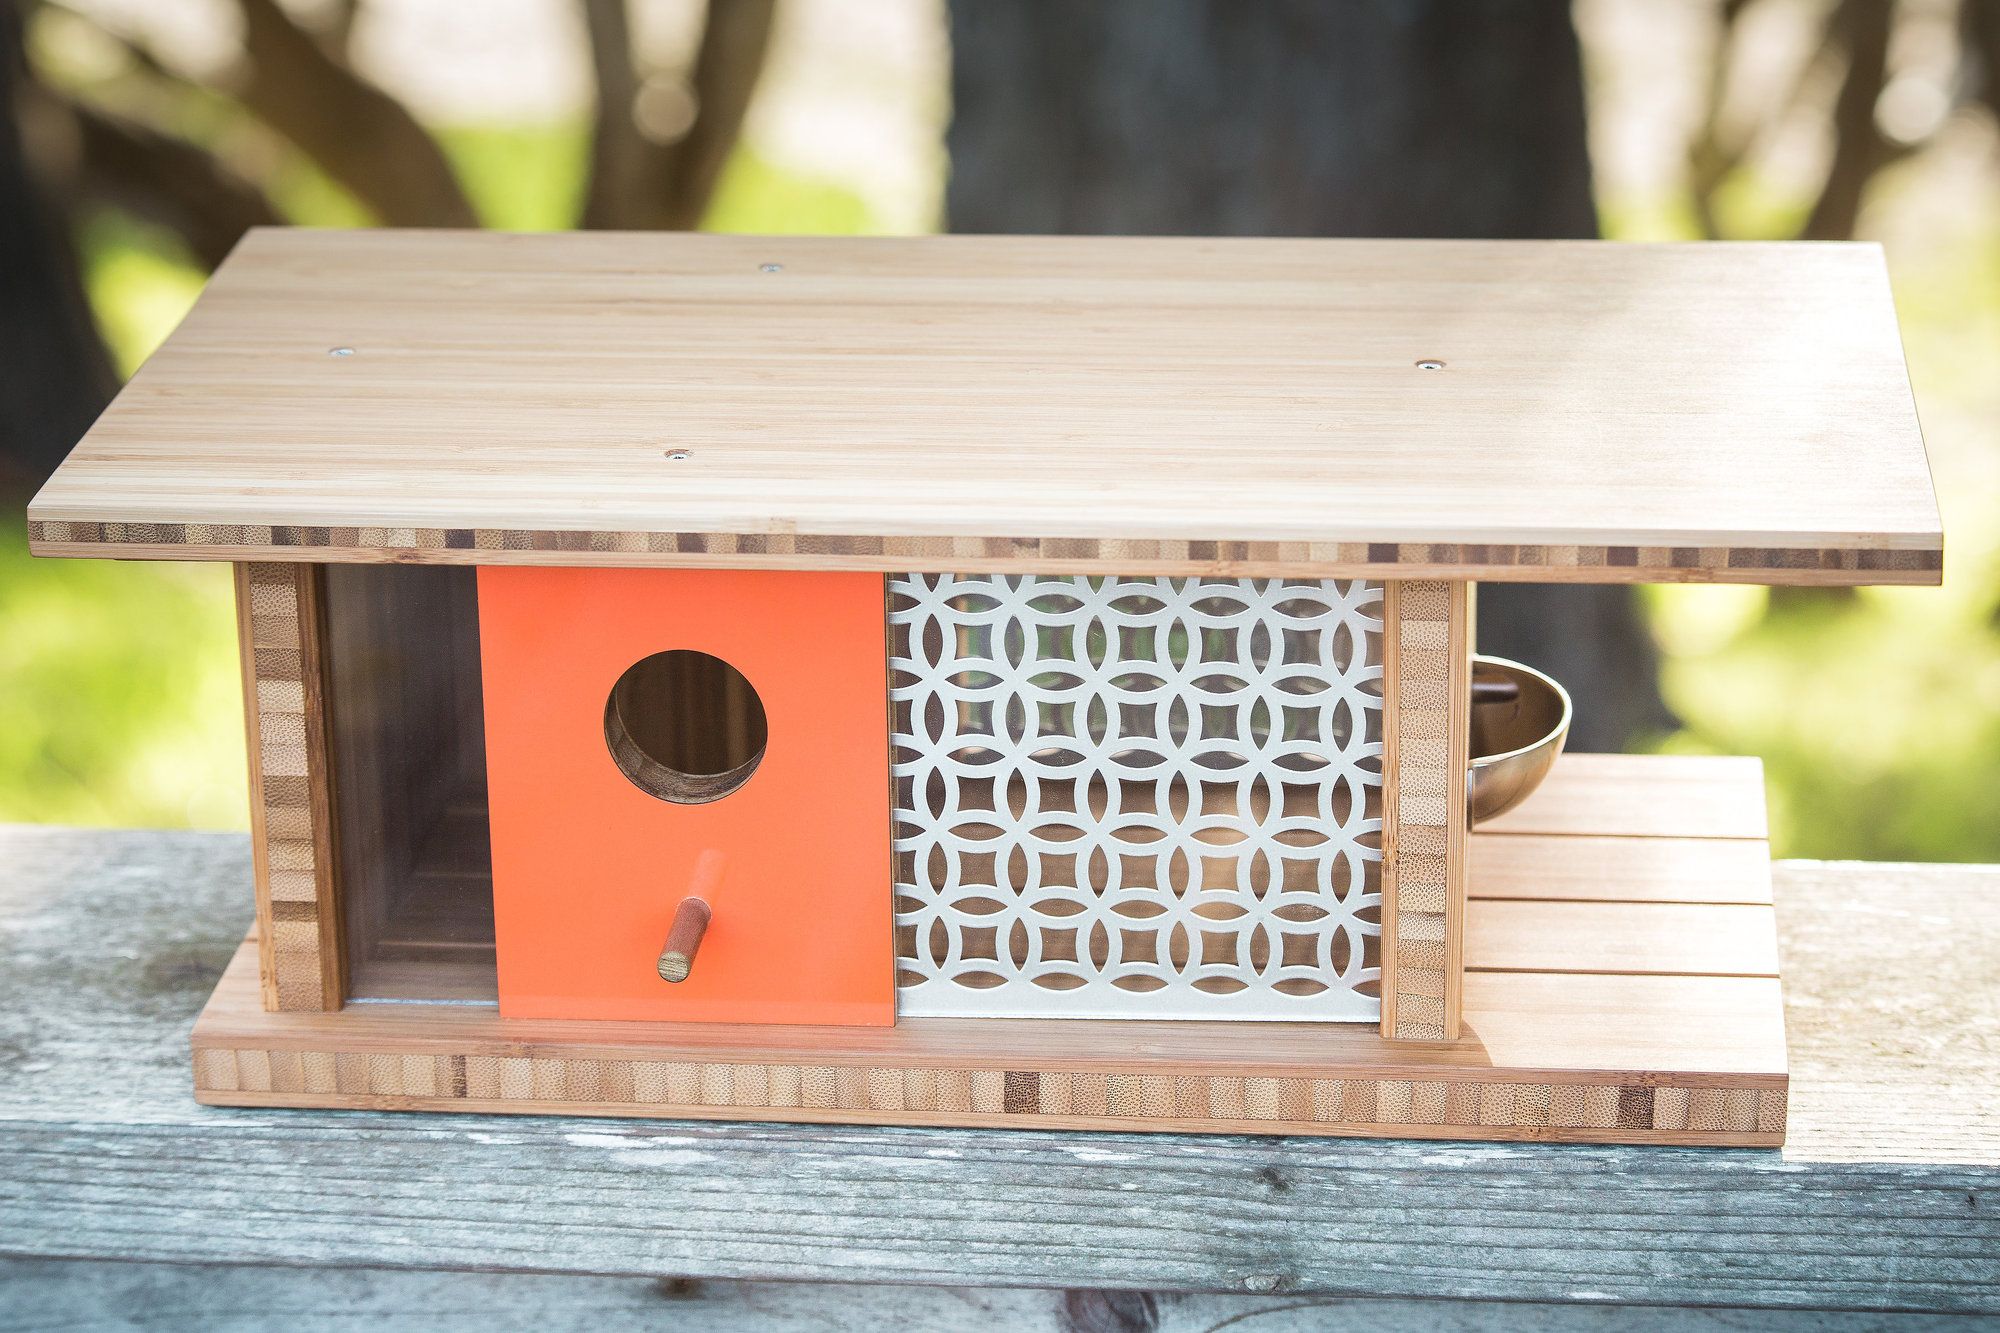 Elegant Birdhouses Inspired by the Architecture of Frank Lloyd Wright